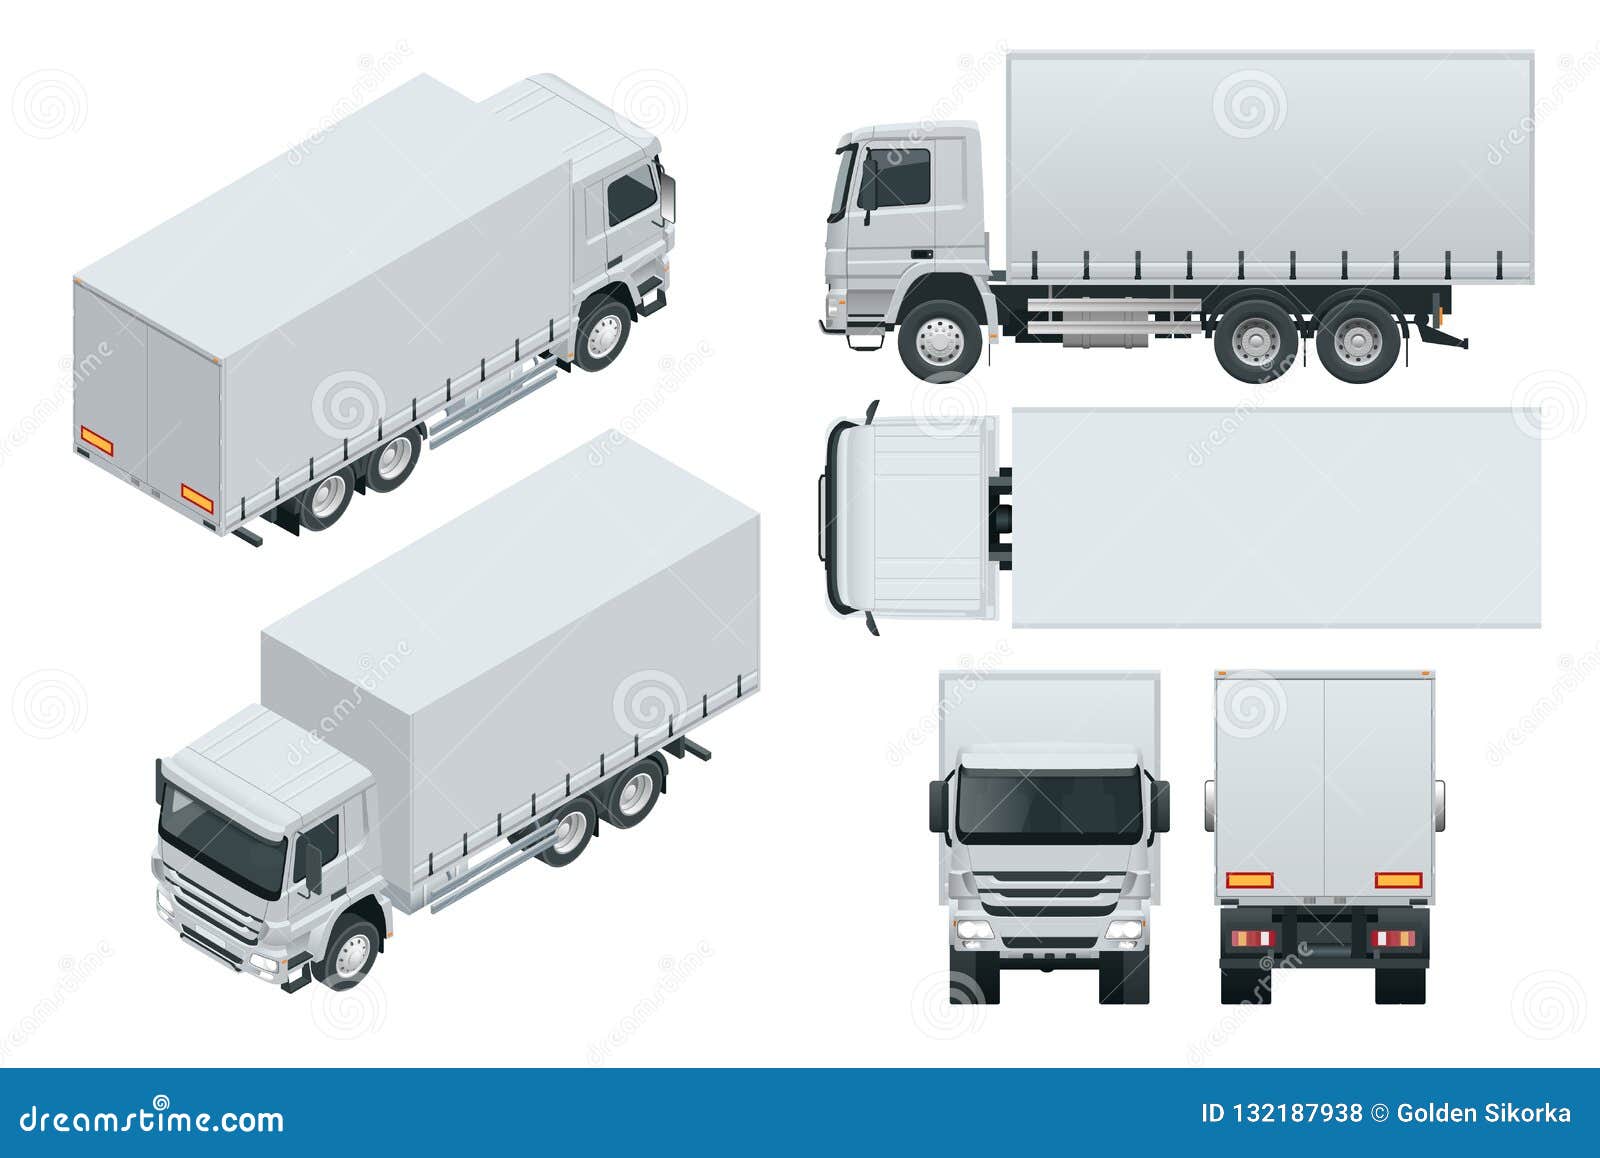 truck delivery, lorry mock-up  template on white background. isometric, side, front, back, top view.